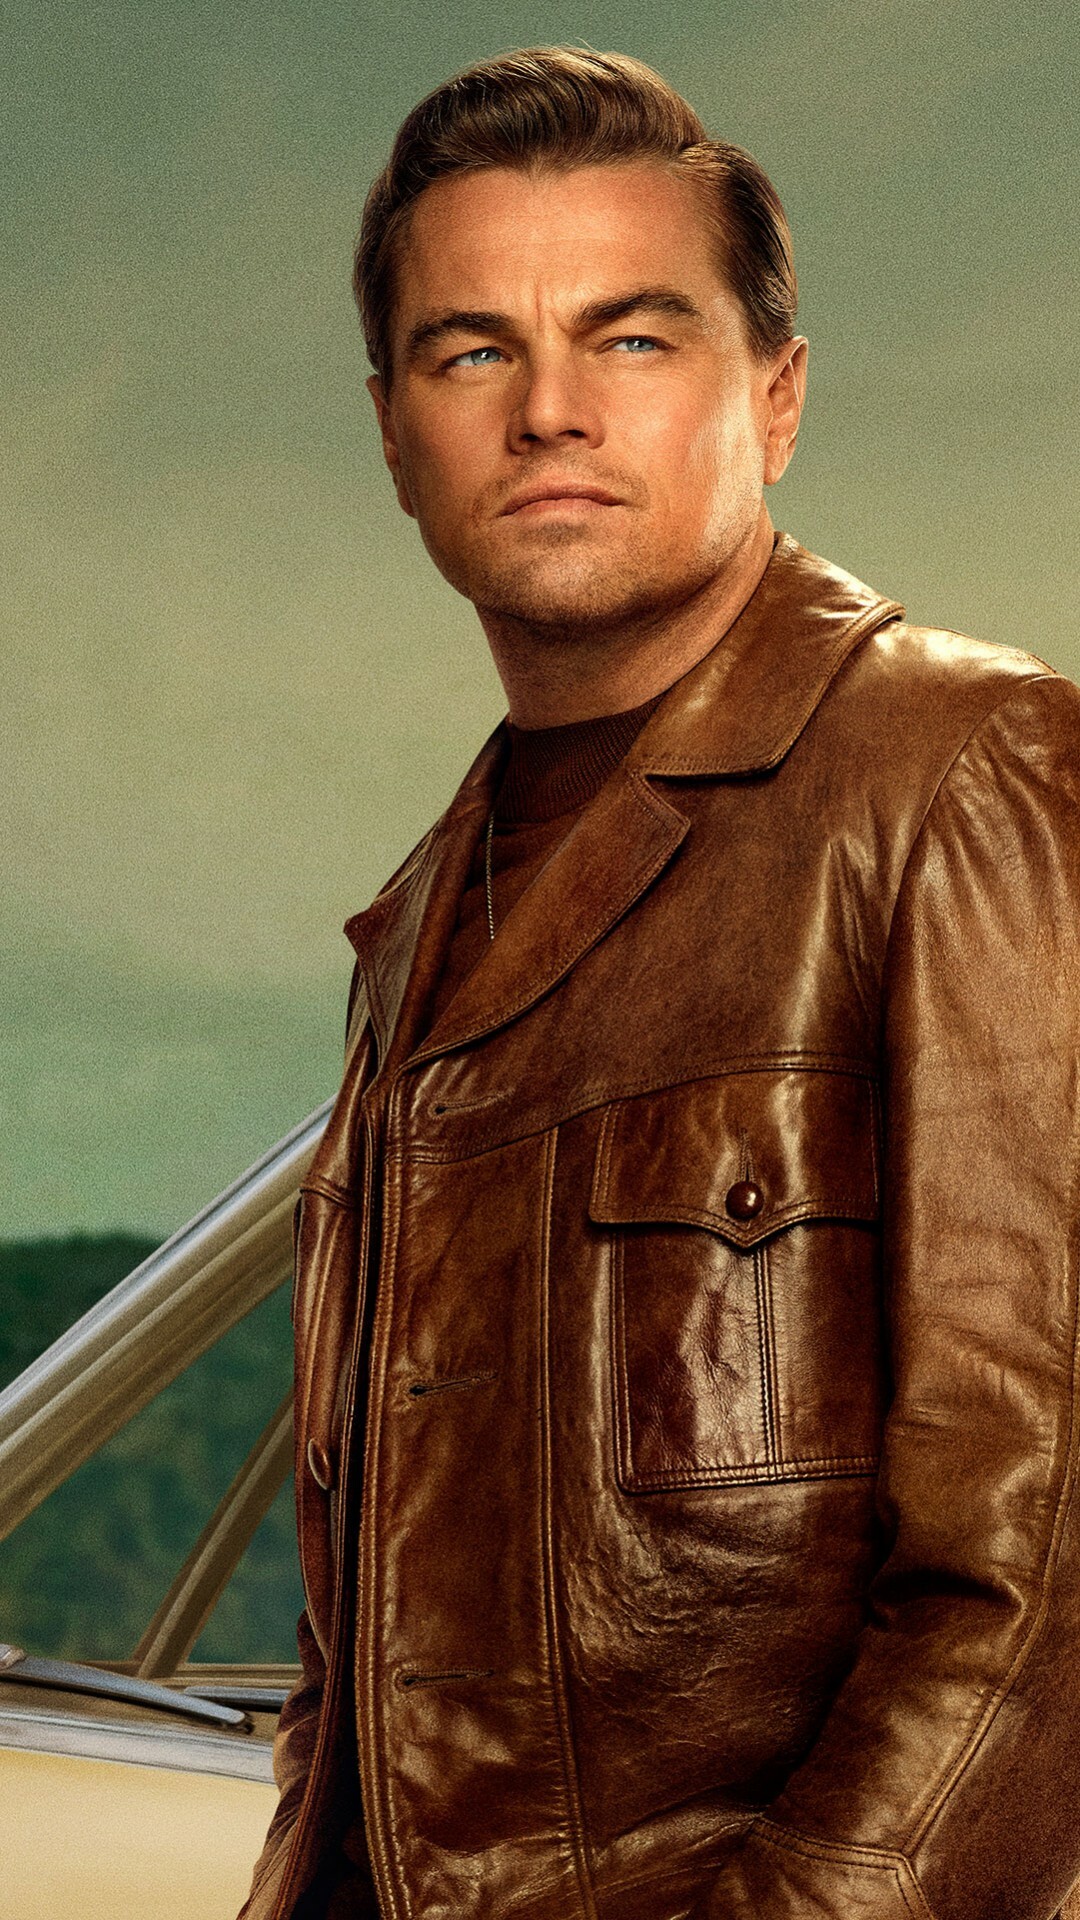 Leonardo DiCaprio, Brad Pitt Zusammenarbeit, Magie des Films, Once Upon a Time in Hollywood, 1080x1920 Full HD Handy